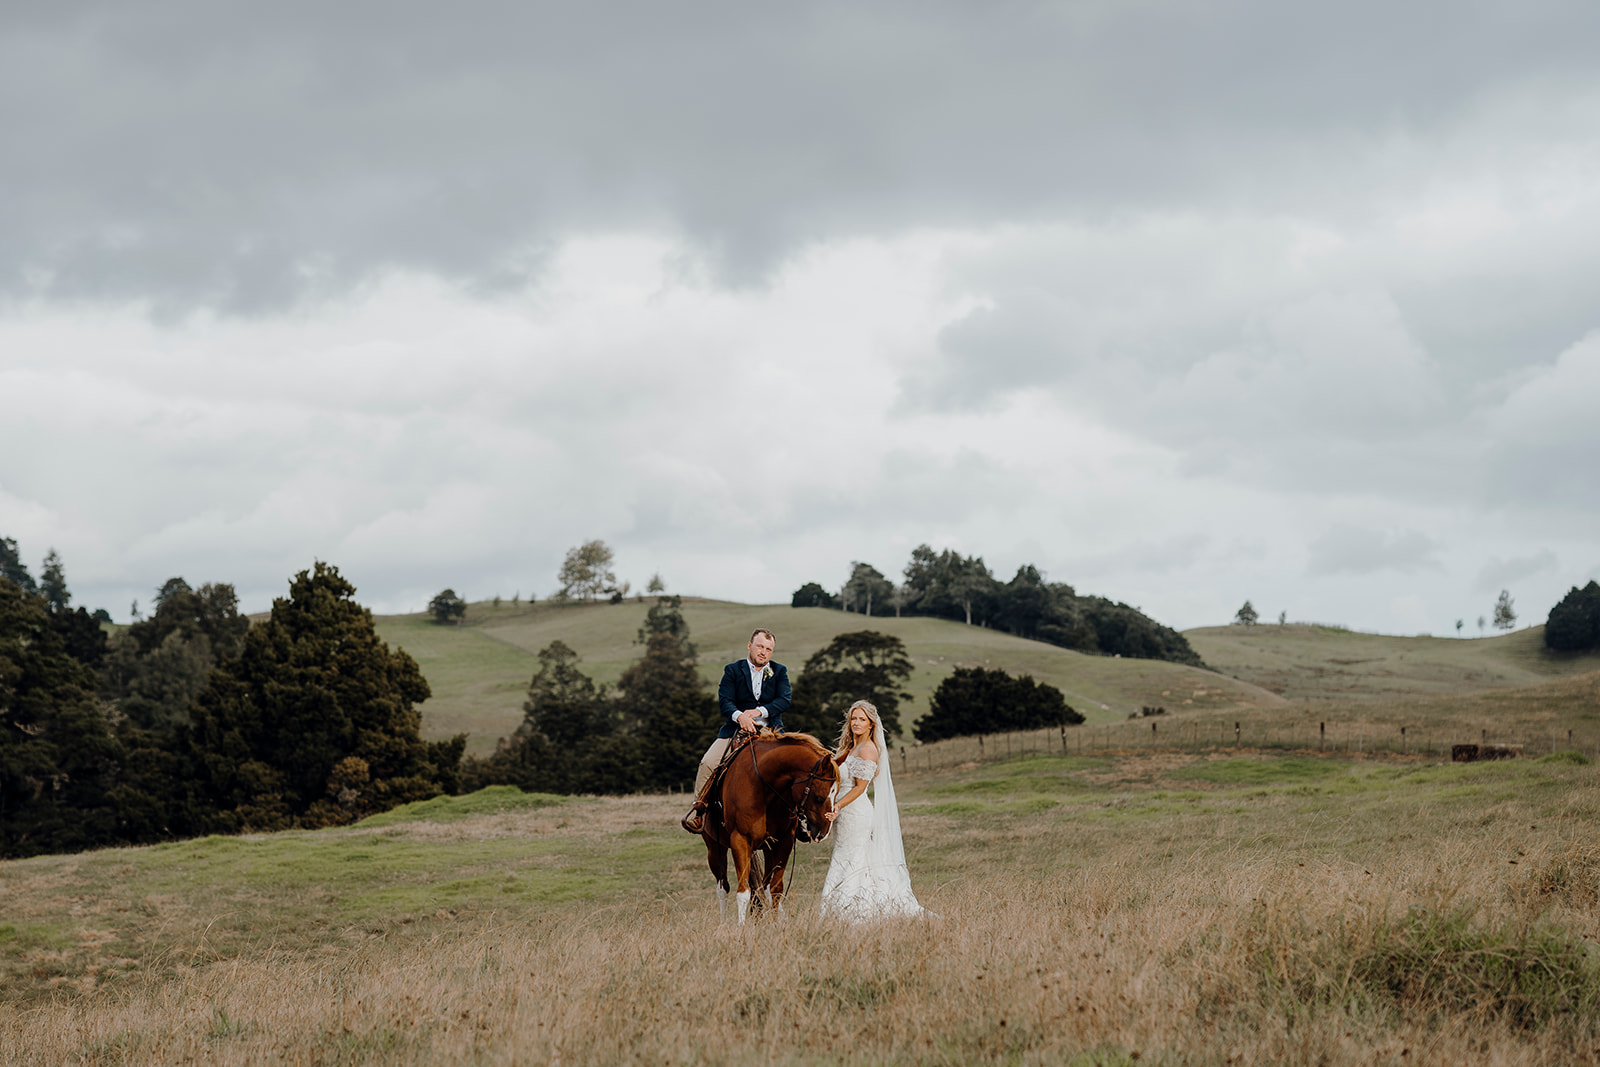 A bride standing next to a horse that a groom is sitting on during a wedding portrait photoshoot in northland where the couple have just gotten married